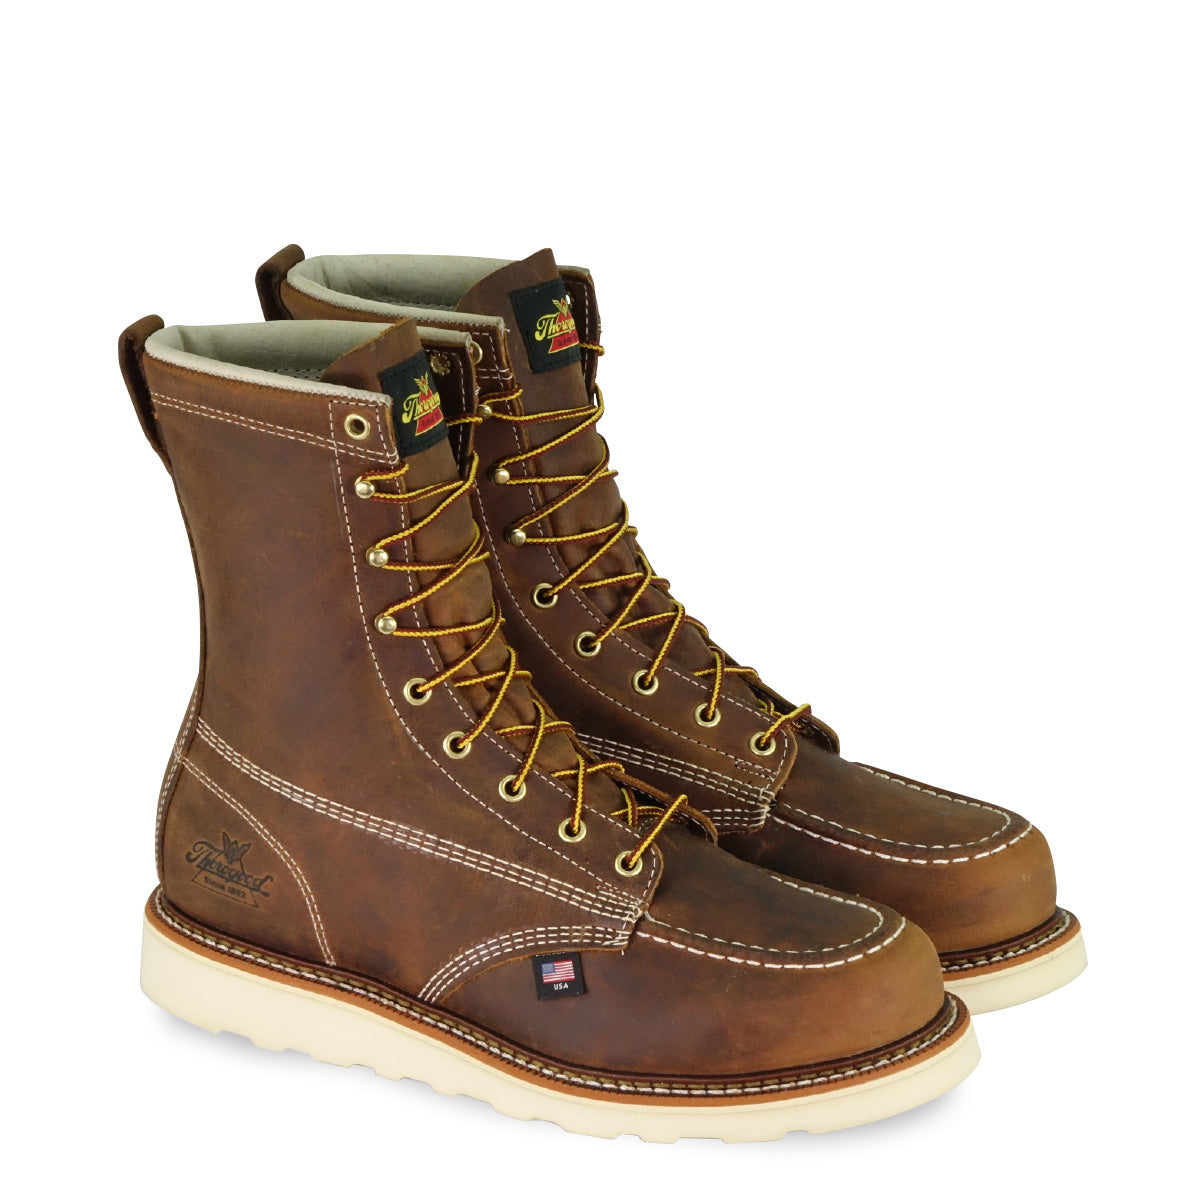 Thorogood Men's American Heritage 8" Moc Toe MAXWear Wedge™ Non-Safety Toe Work Boot in Trail Crazyhorse from the side